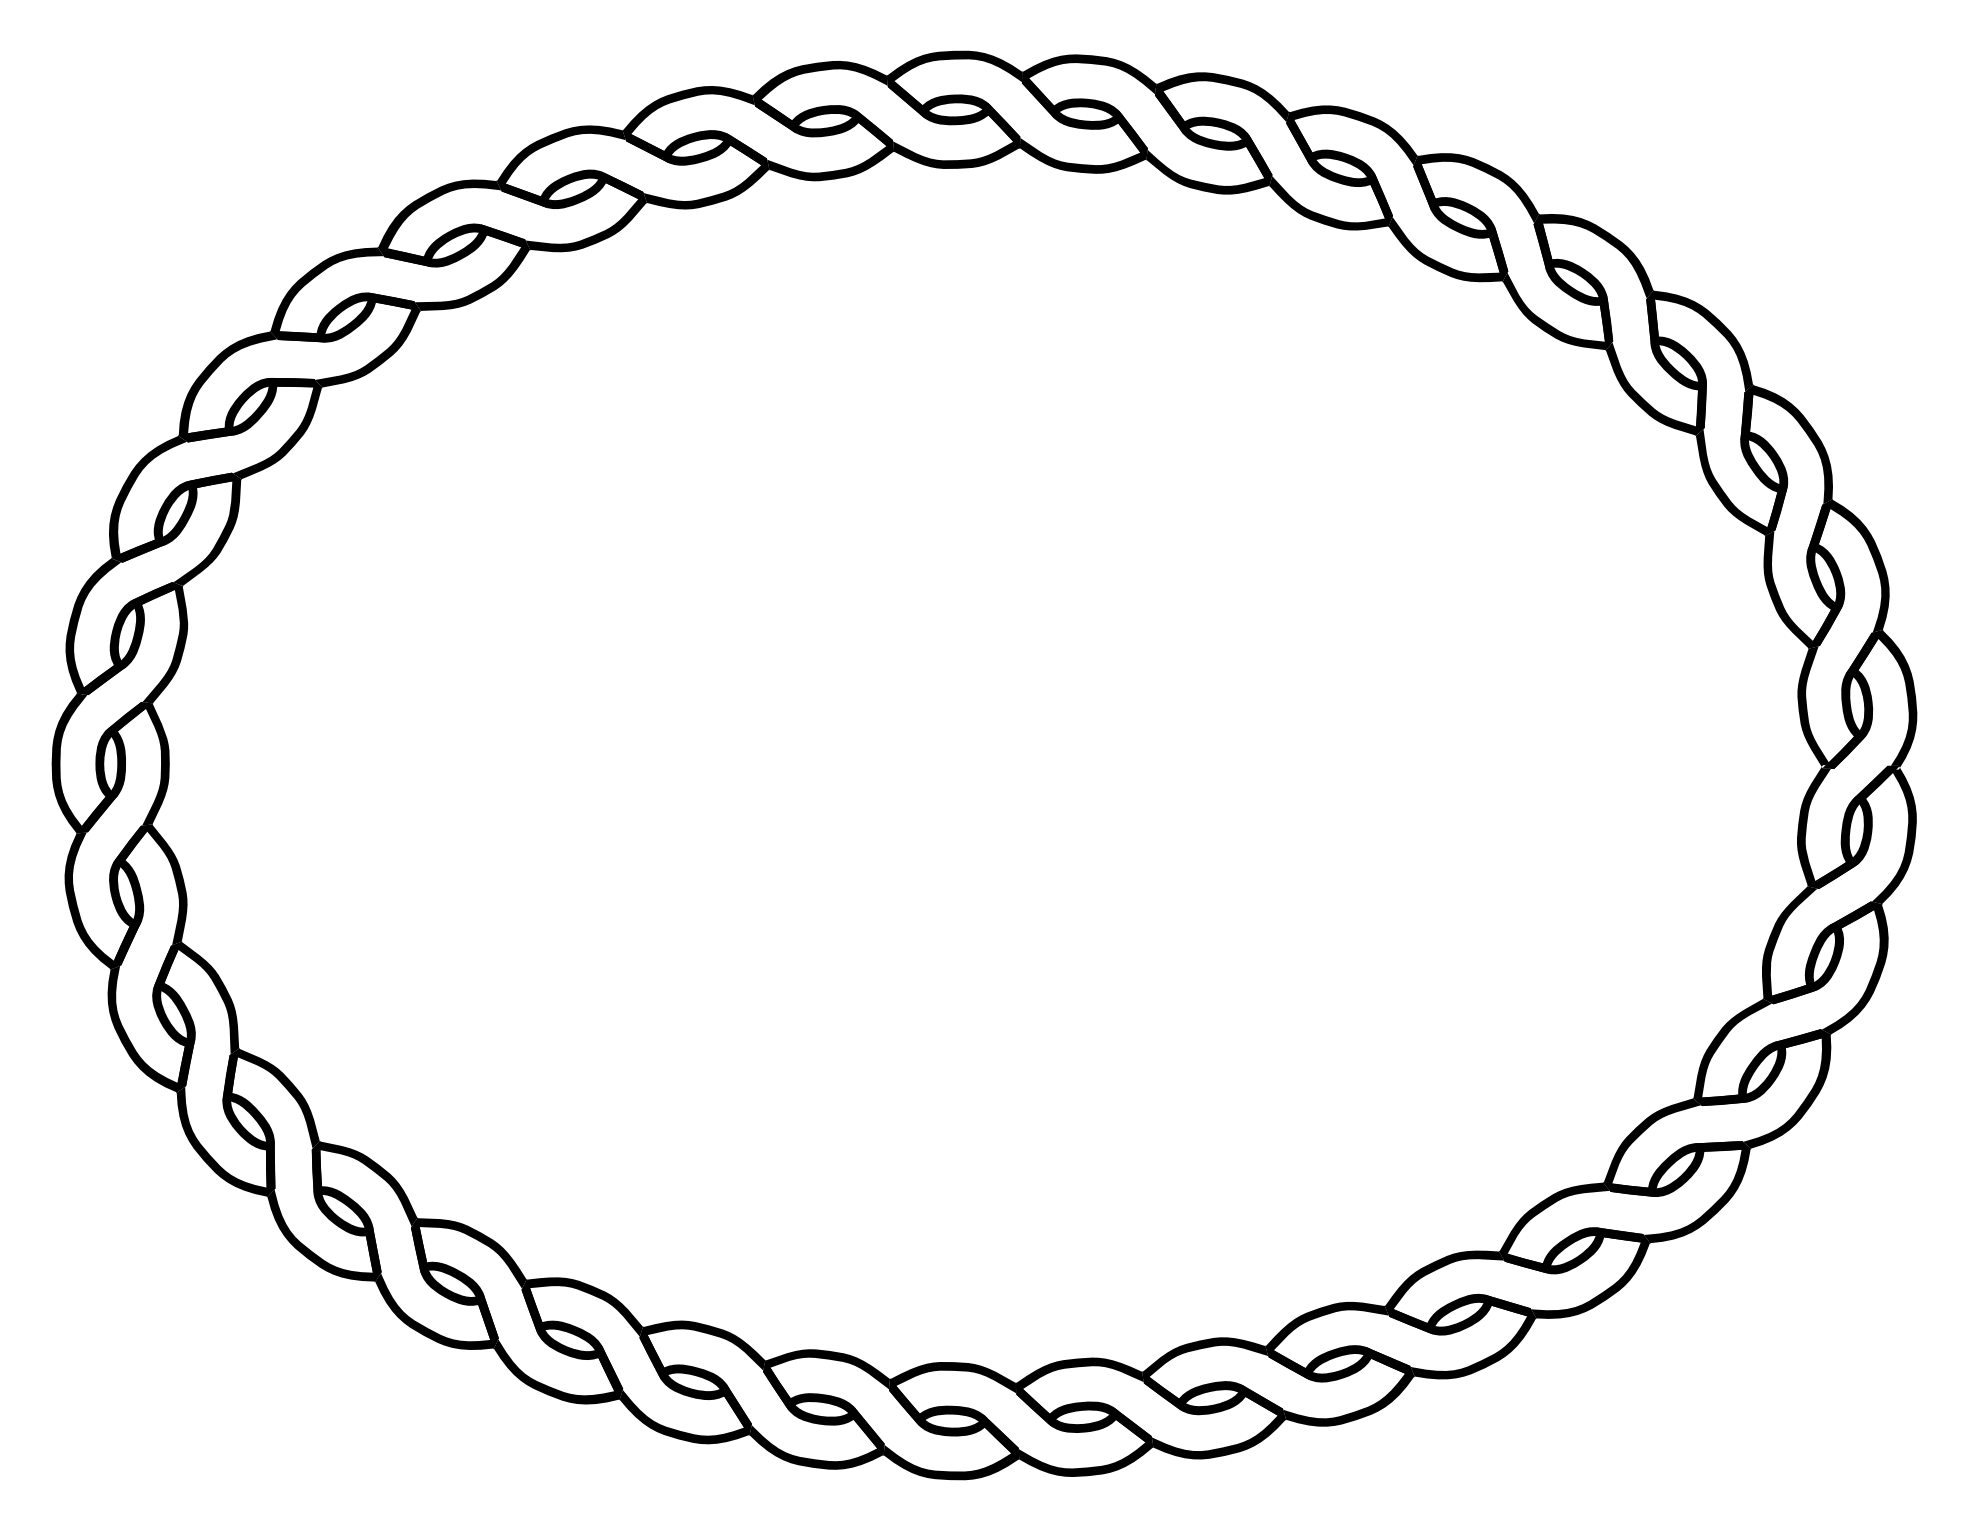 Clipart designs oval. Frame black and white